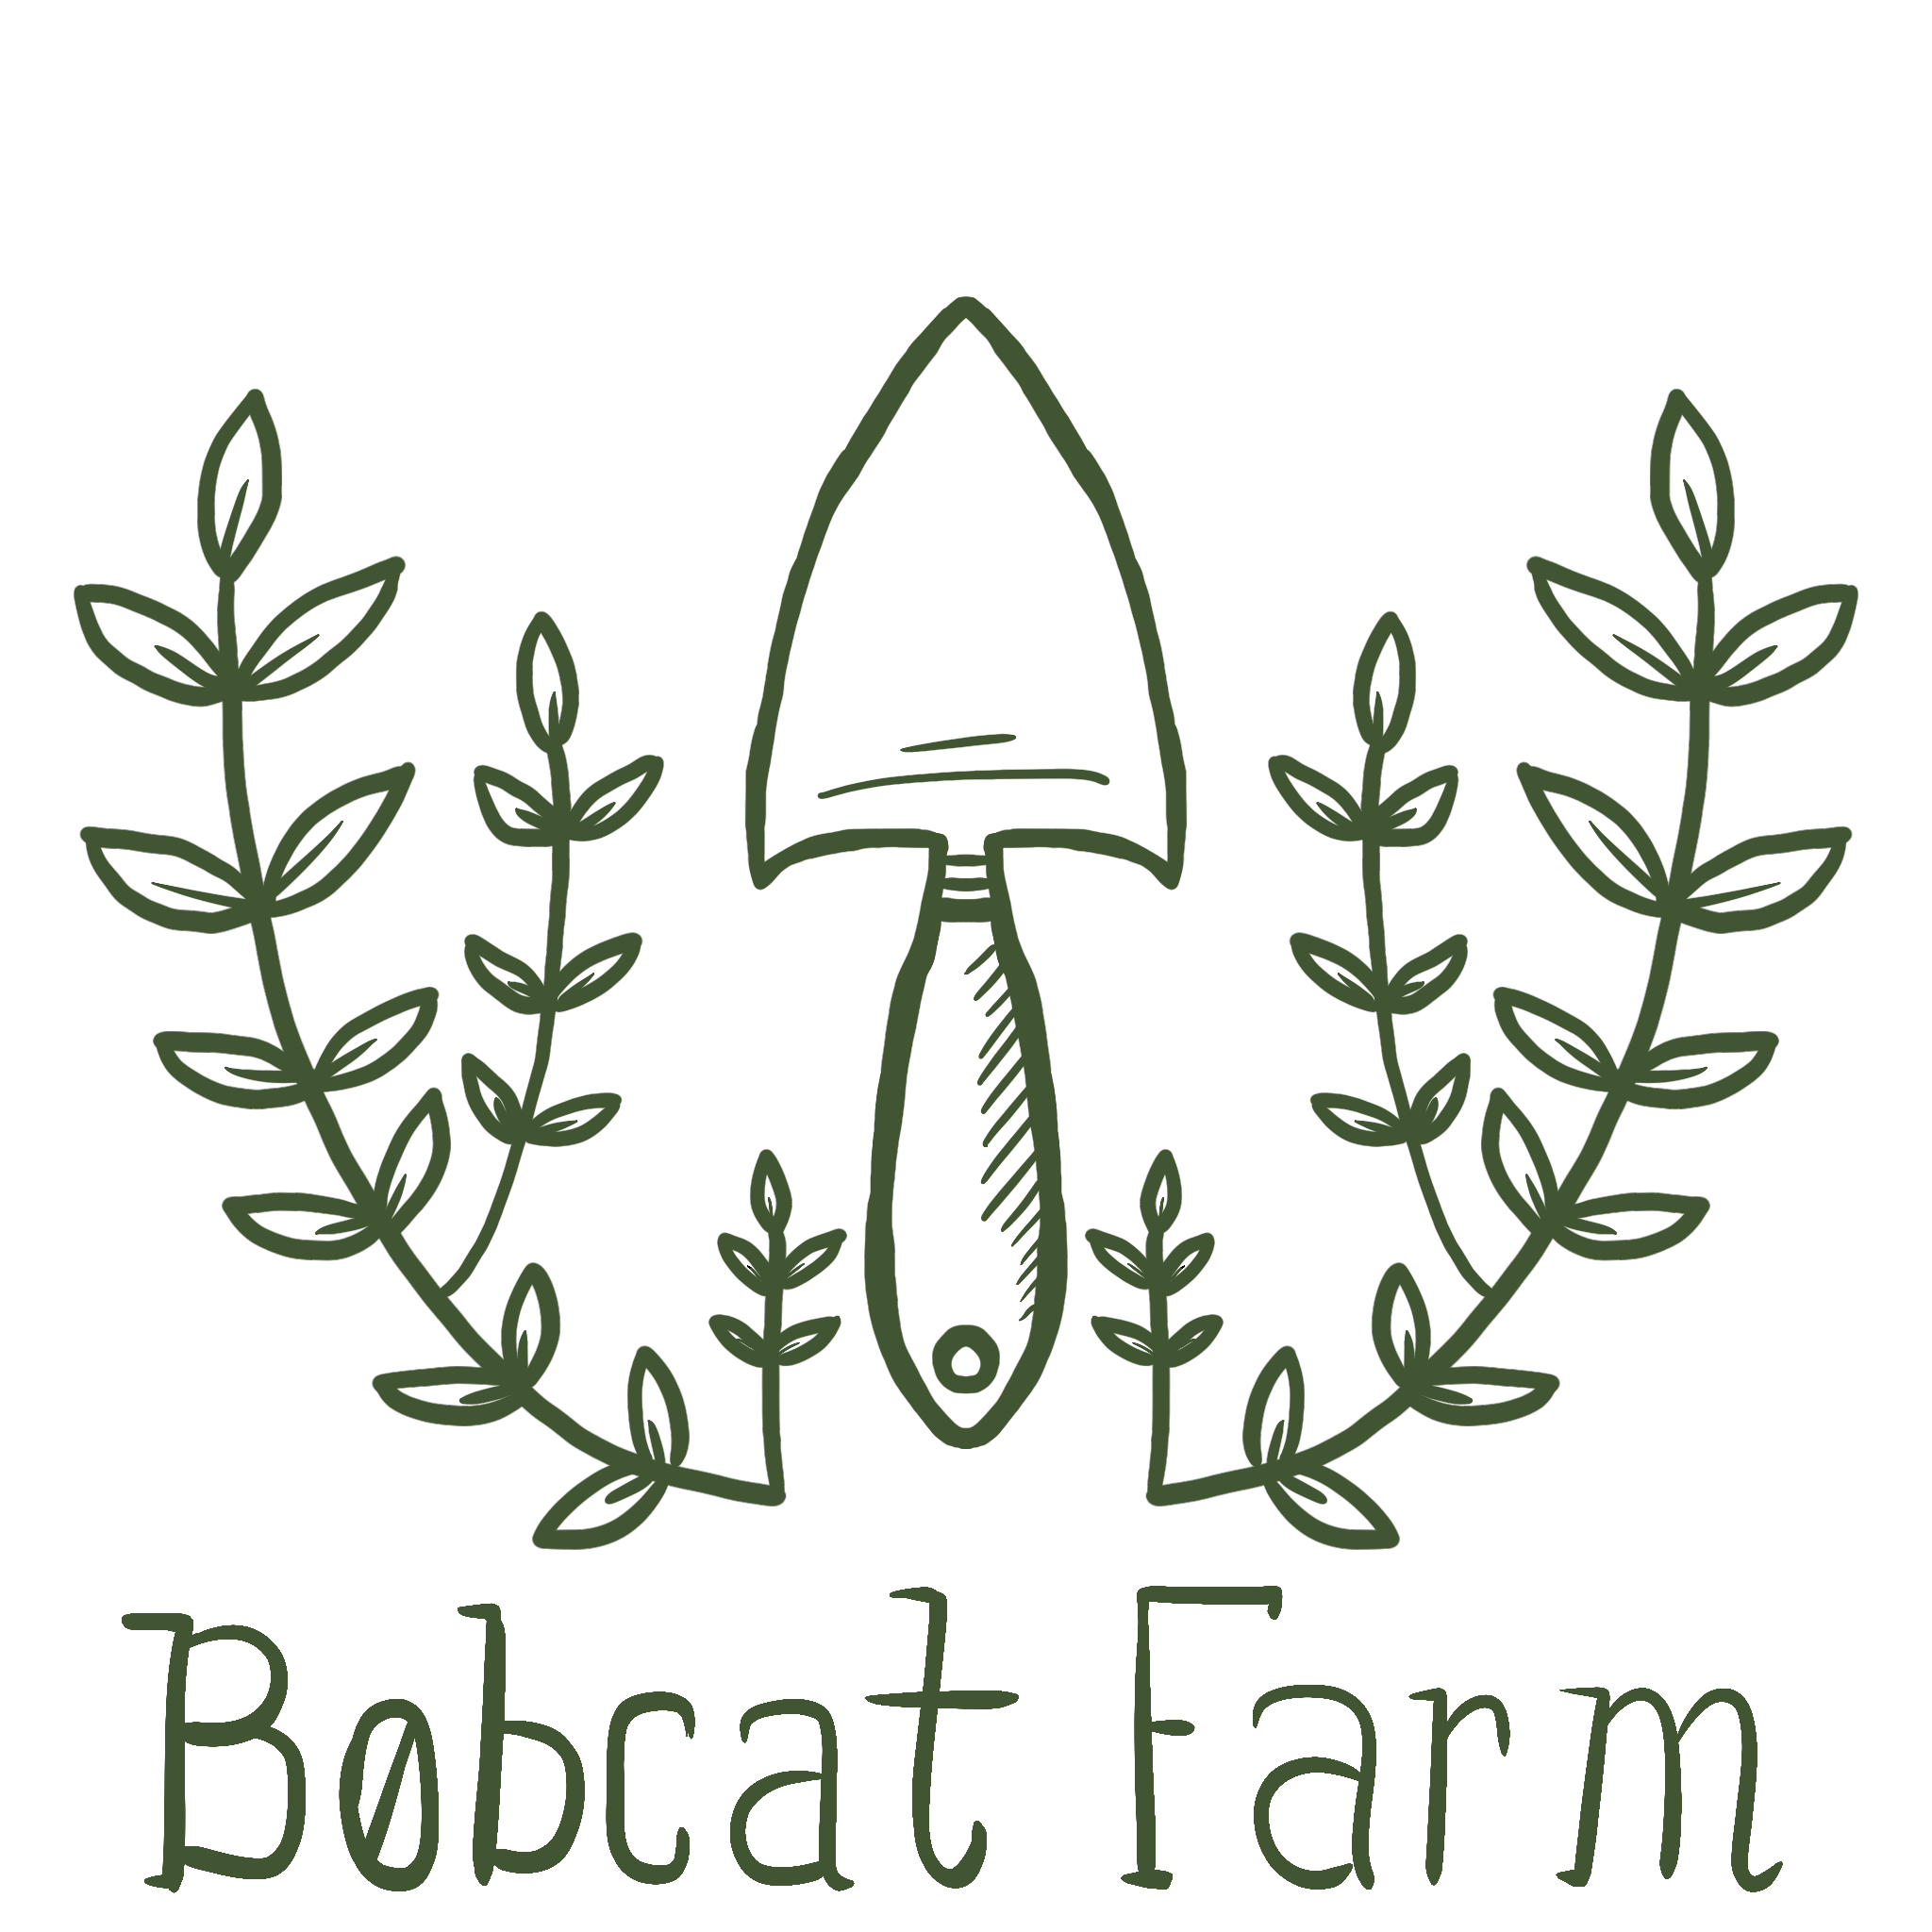 2023 Bobcat farm logo. Digitally rendered line drawing in forest green color. Drawing is of a garden trowel between two vines pointed upward on top of handwritten "bobcat farm"